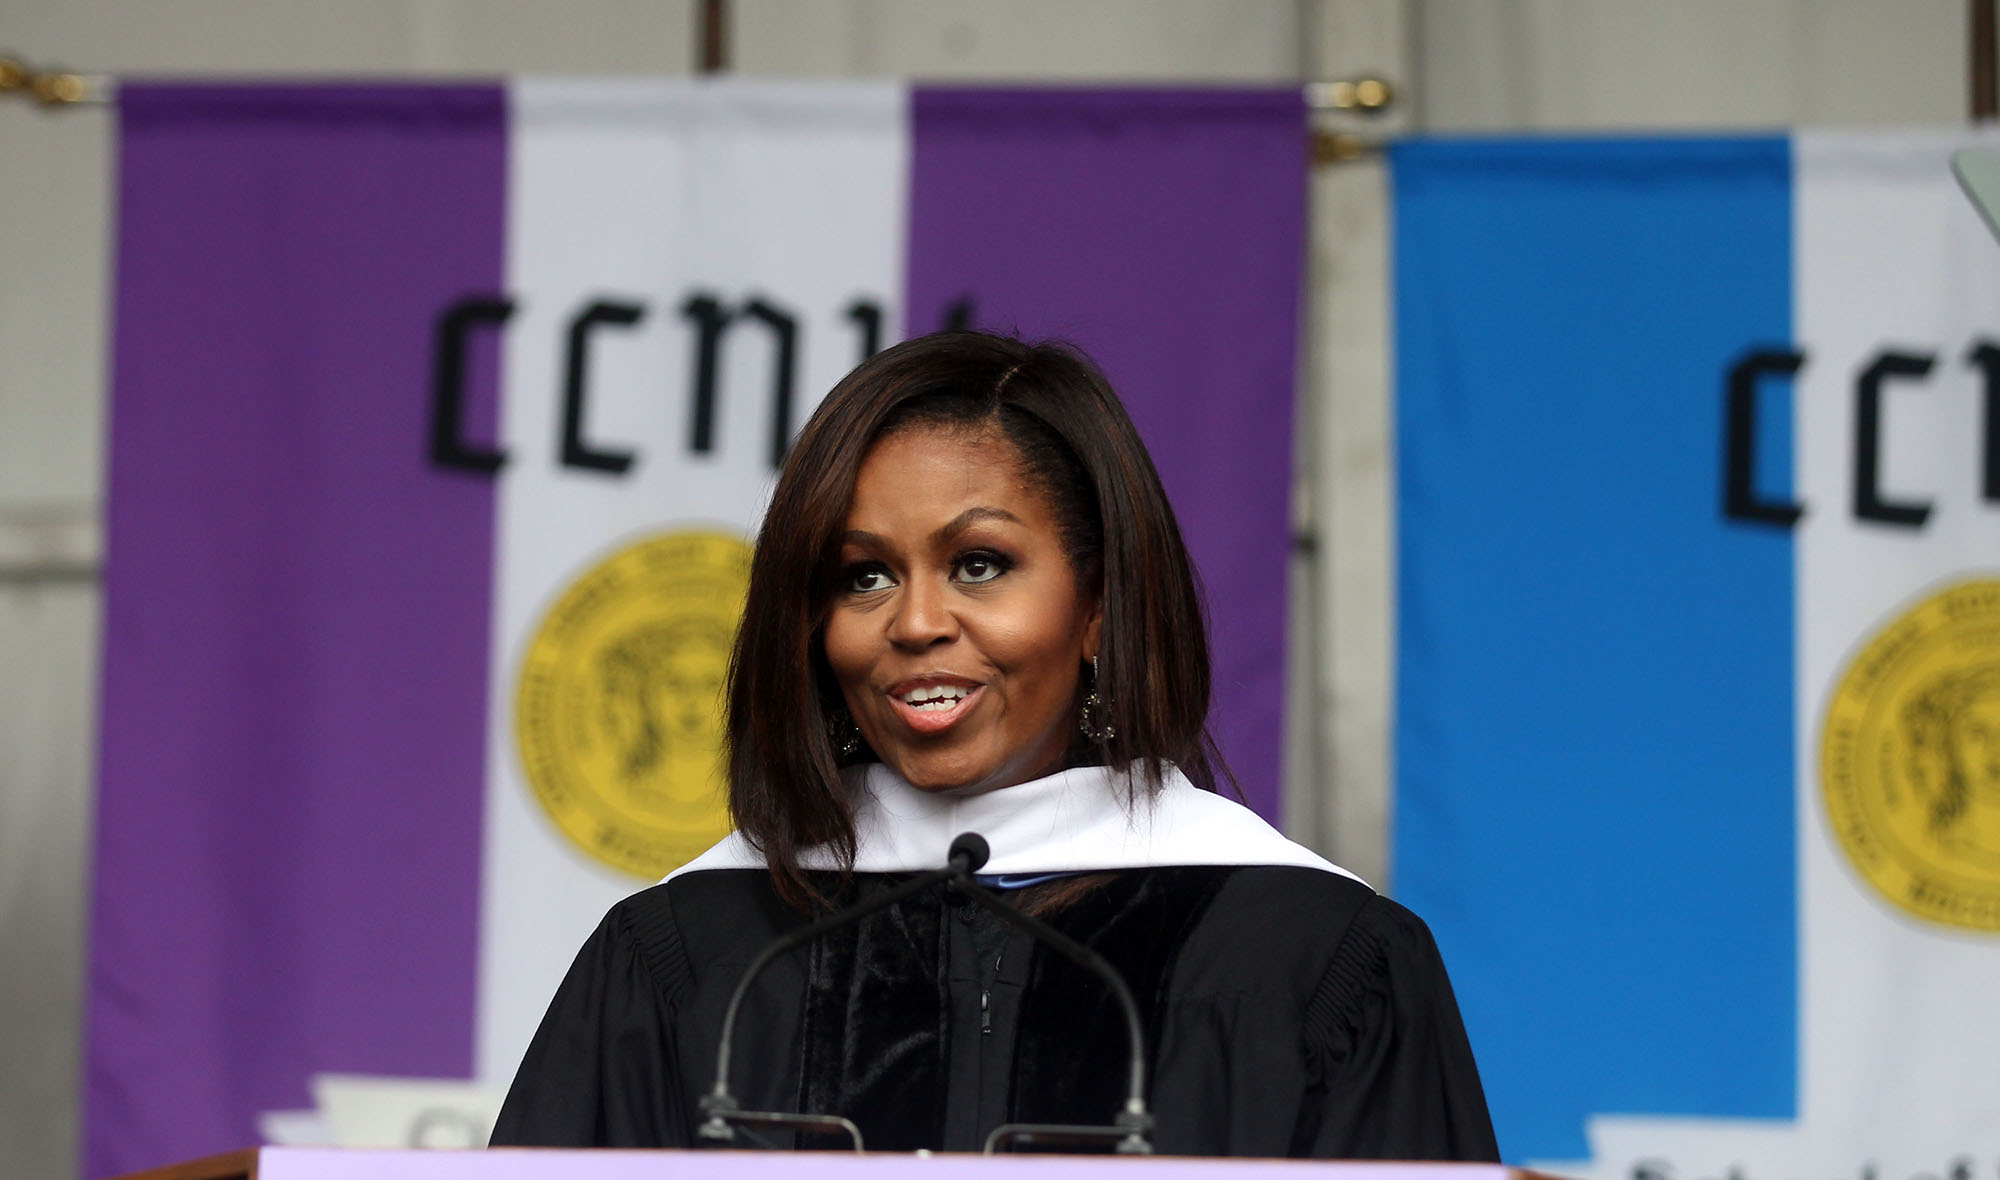 NEW YORK, NY - JUNE 03:  First Lady Michelle Obama receives an honorary degree and gives the commencement speech at The City College of New York (Photo by Steve Sands/WireImage) (Steve Sands&mdash;WireImage)